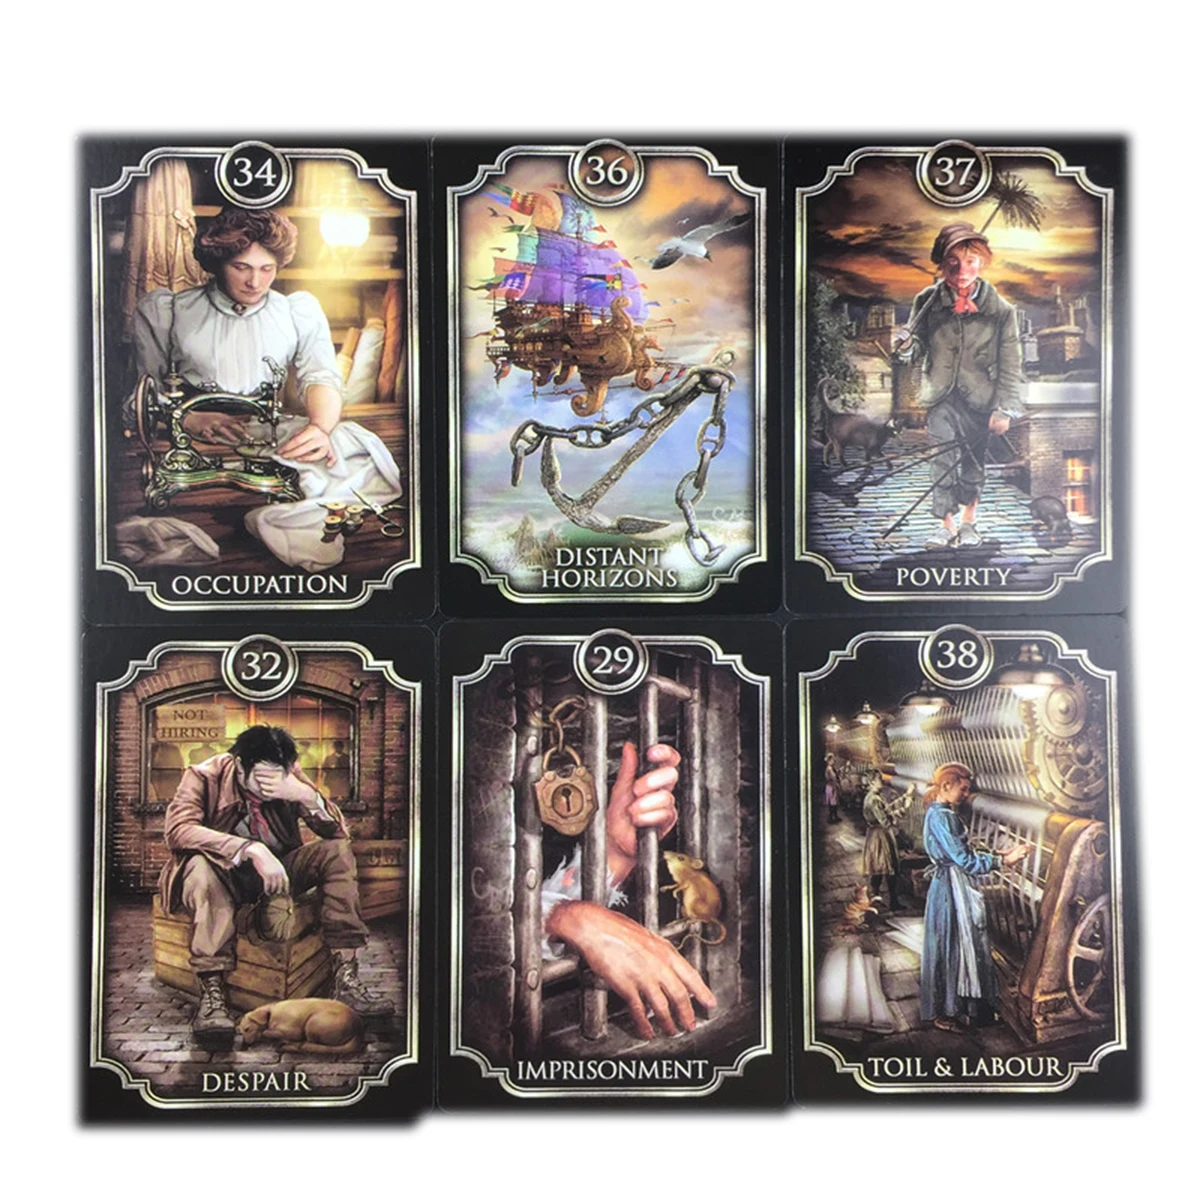 

39 Cards Fin De Siecle Kipper Oracle deck Card Game English Version Divination Fate Board Game Cards With PDF Guidebook